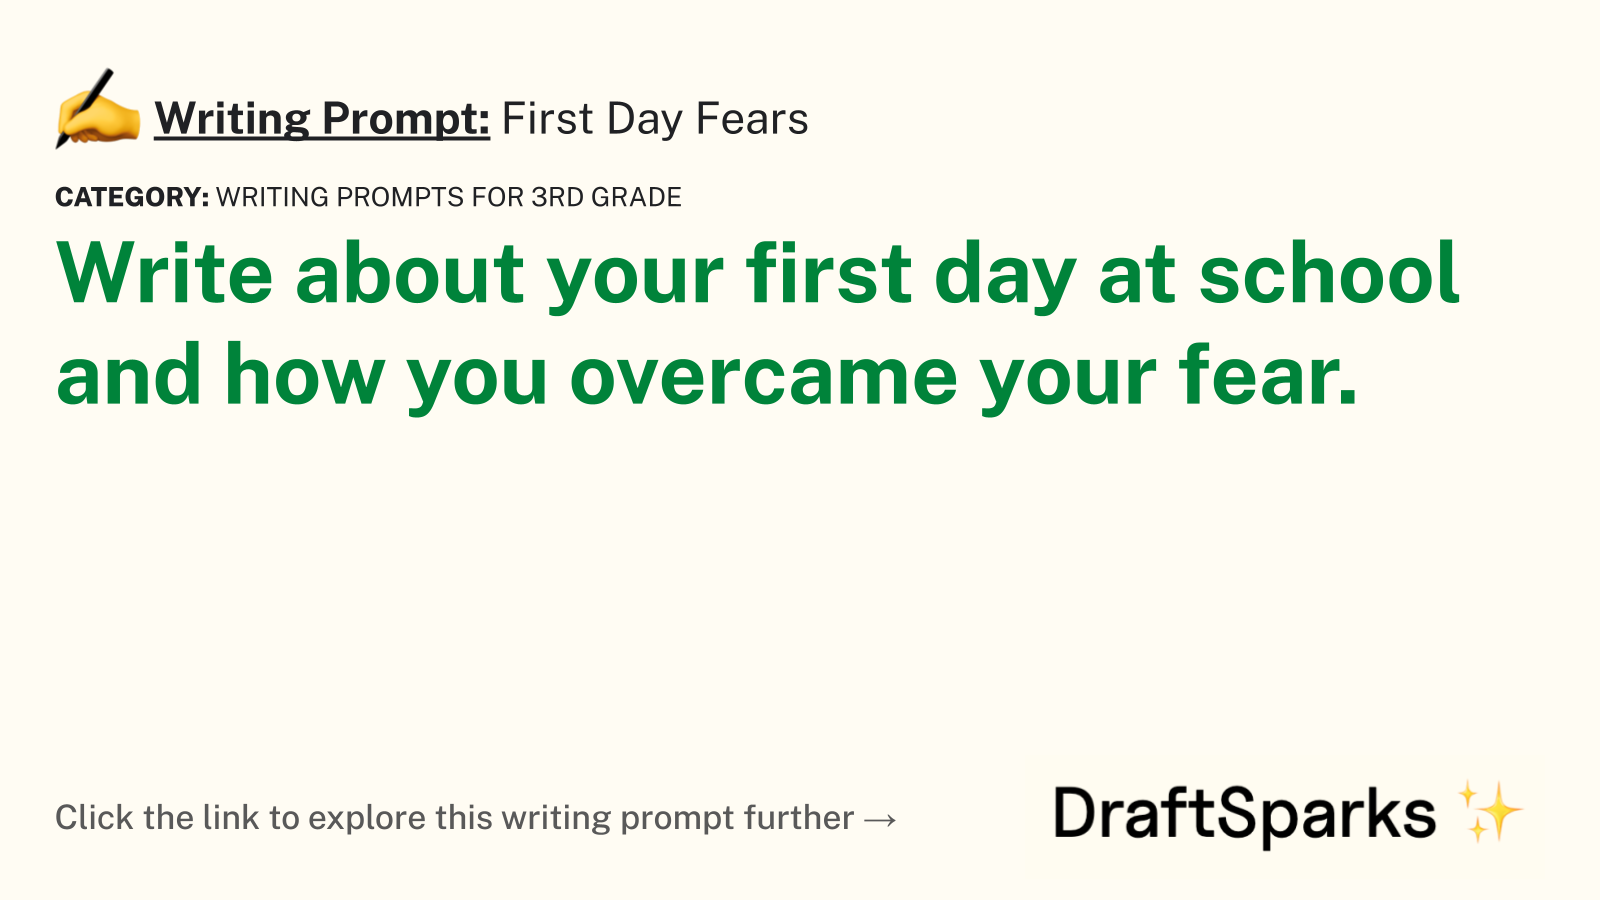 First Day Fears